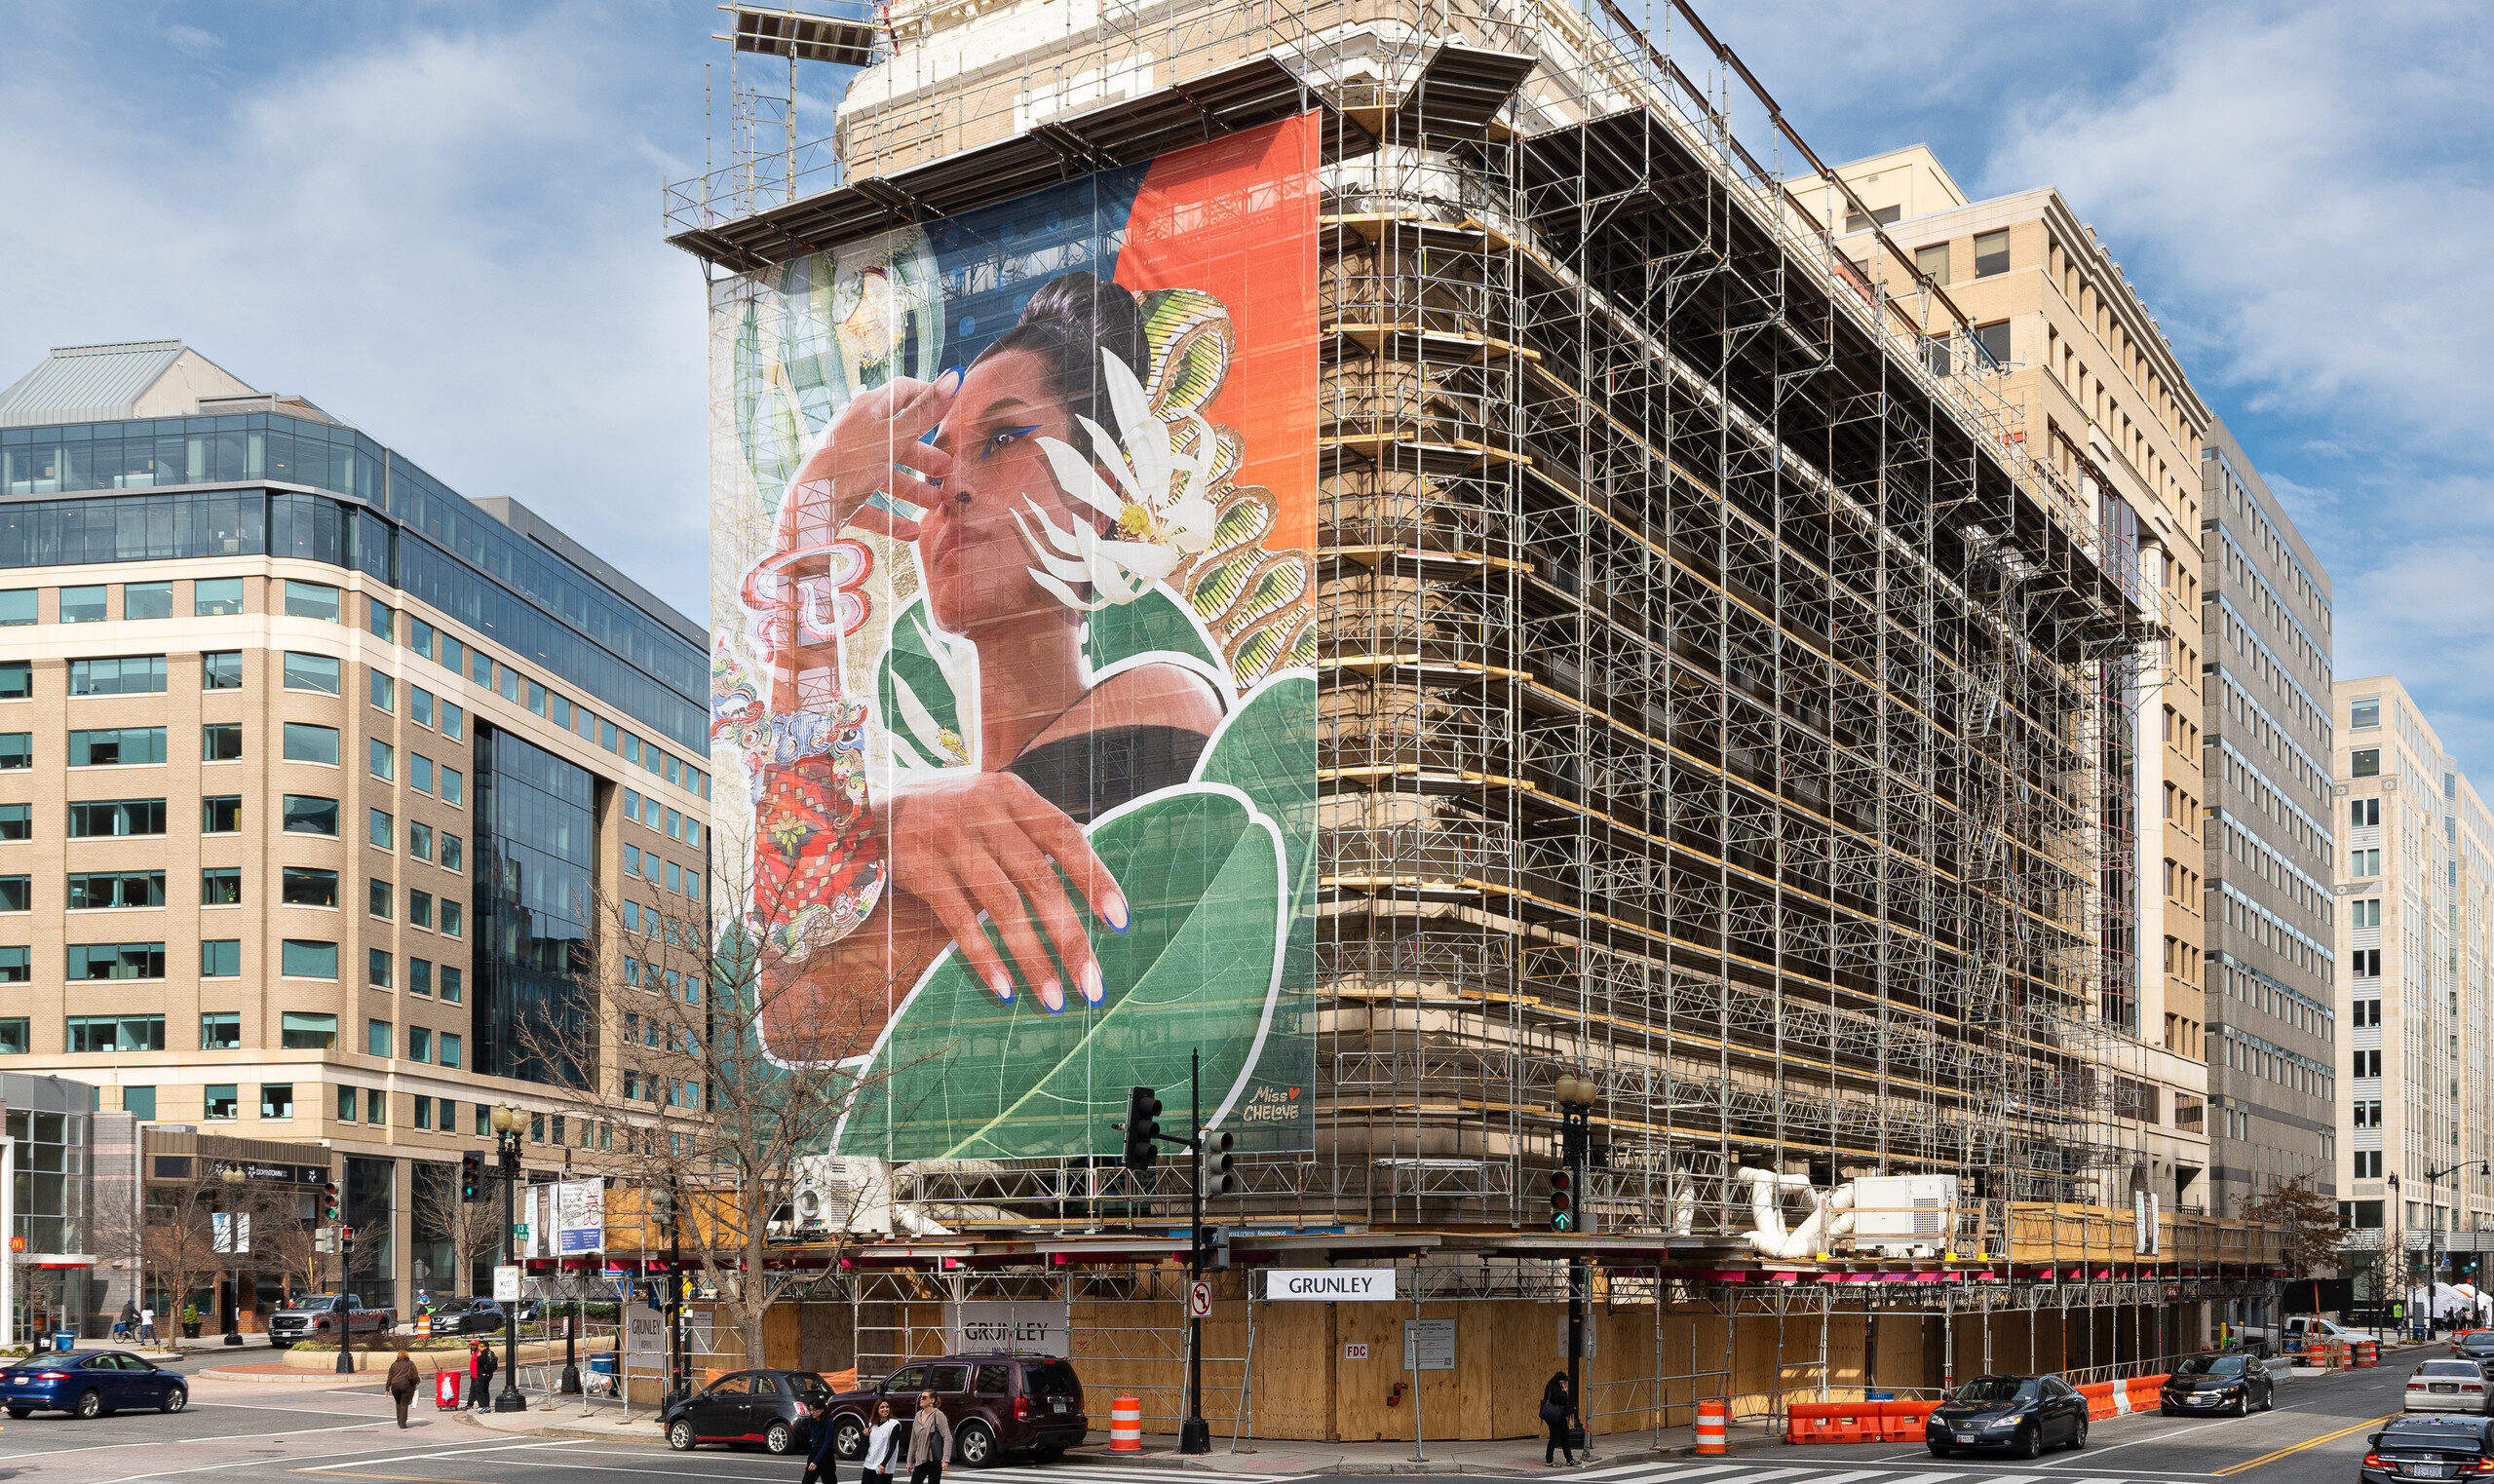 A colorful mural of a woman with flora on scaffolding on the museum building.